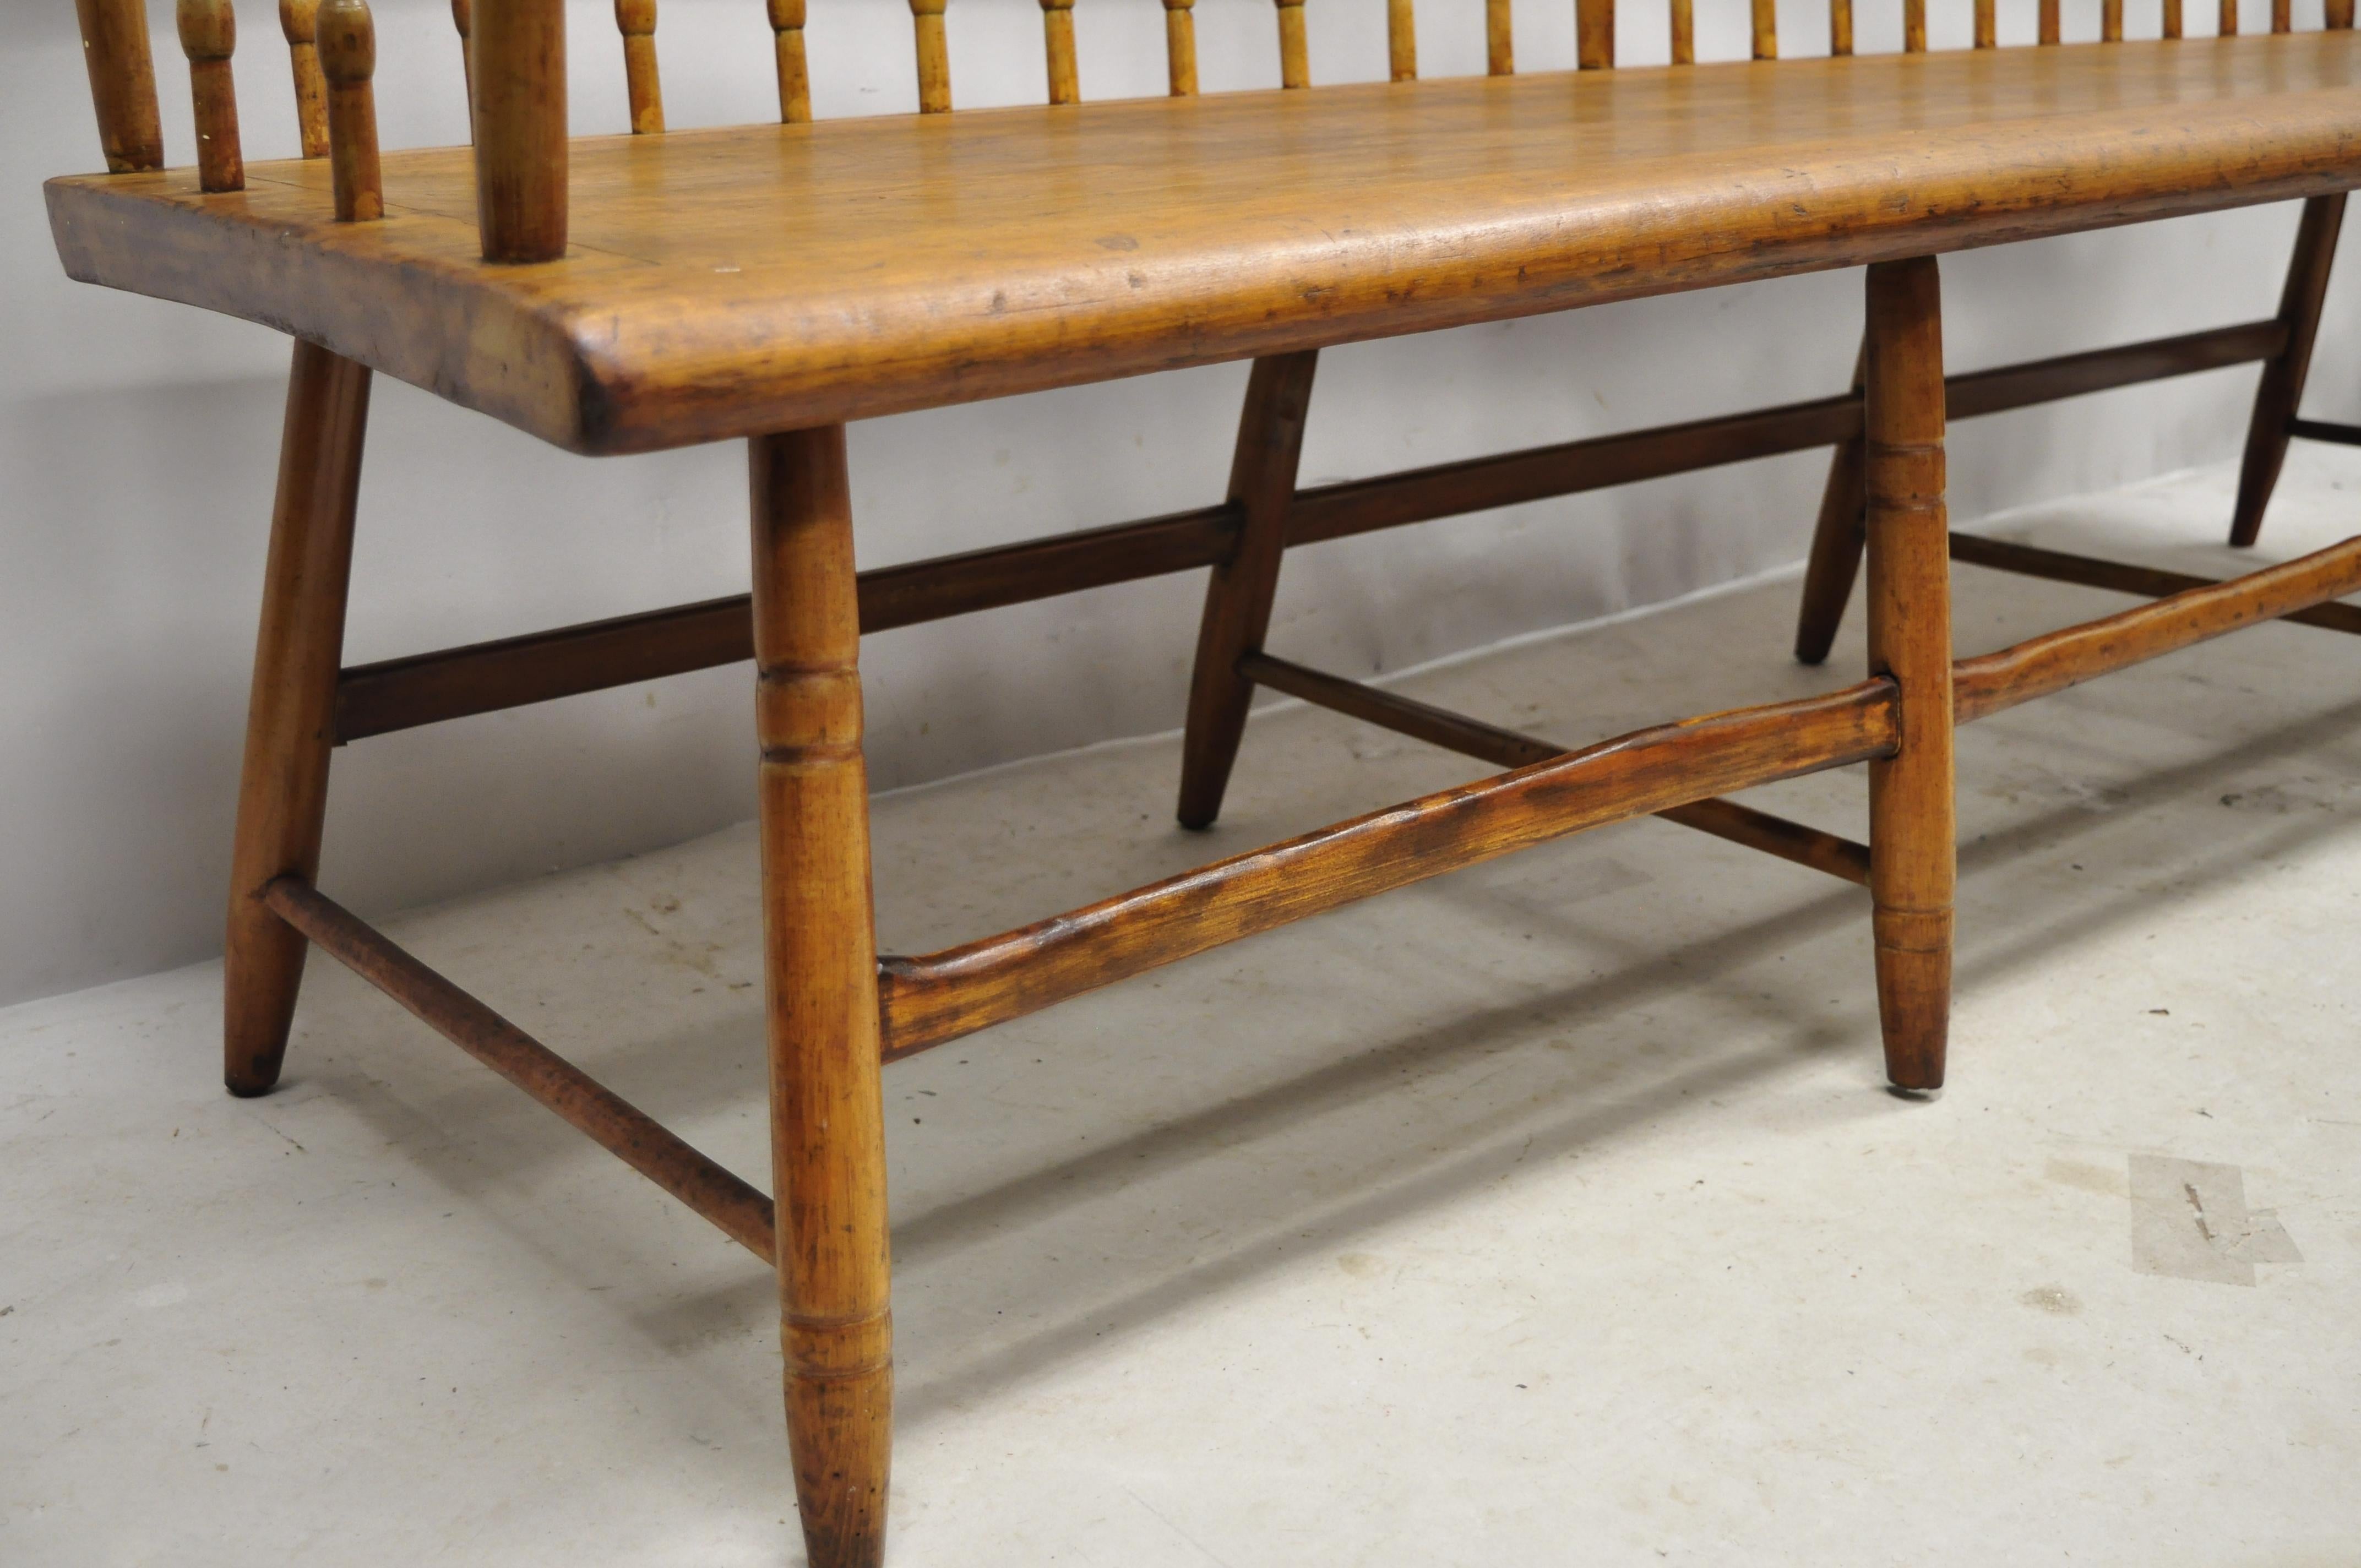 Chestnut 19th Century Antique American Colonial Spindle Back Hitchcock Bench